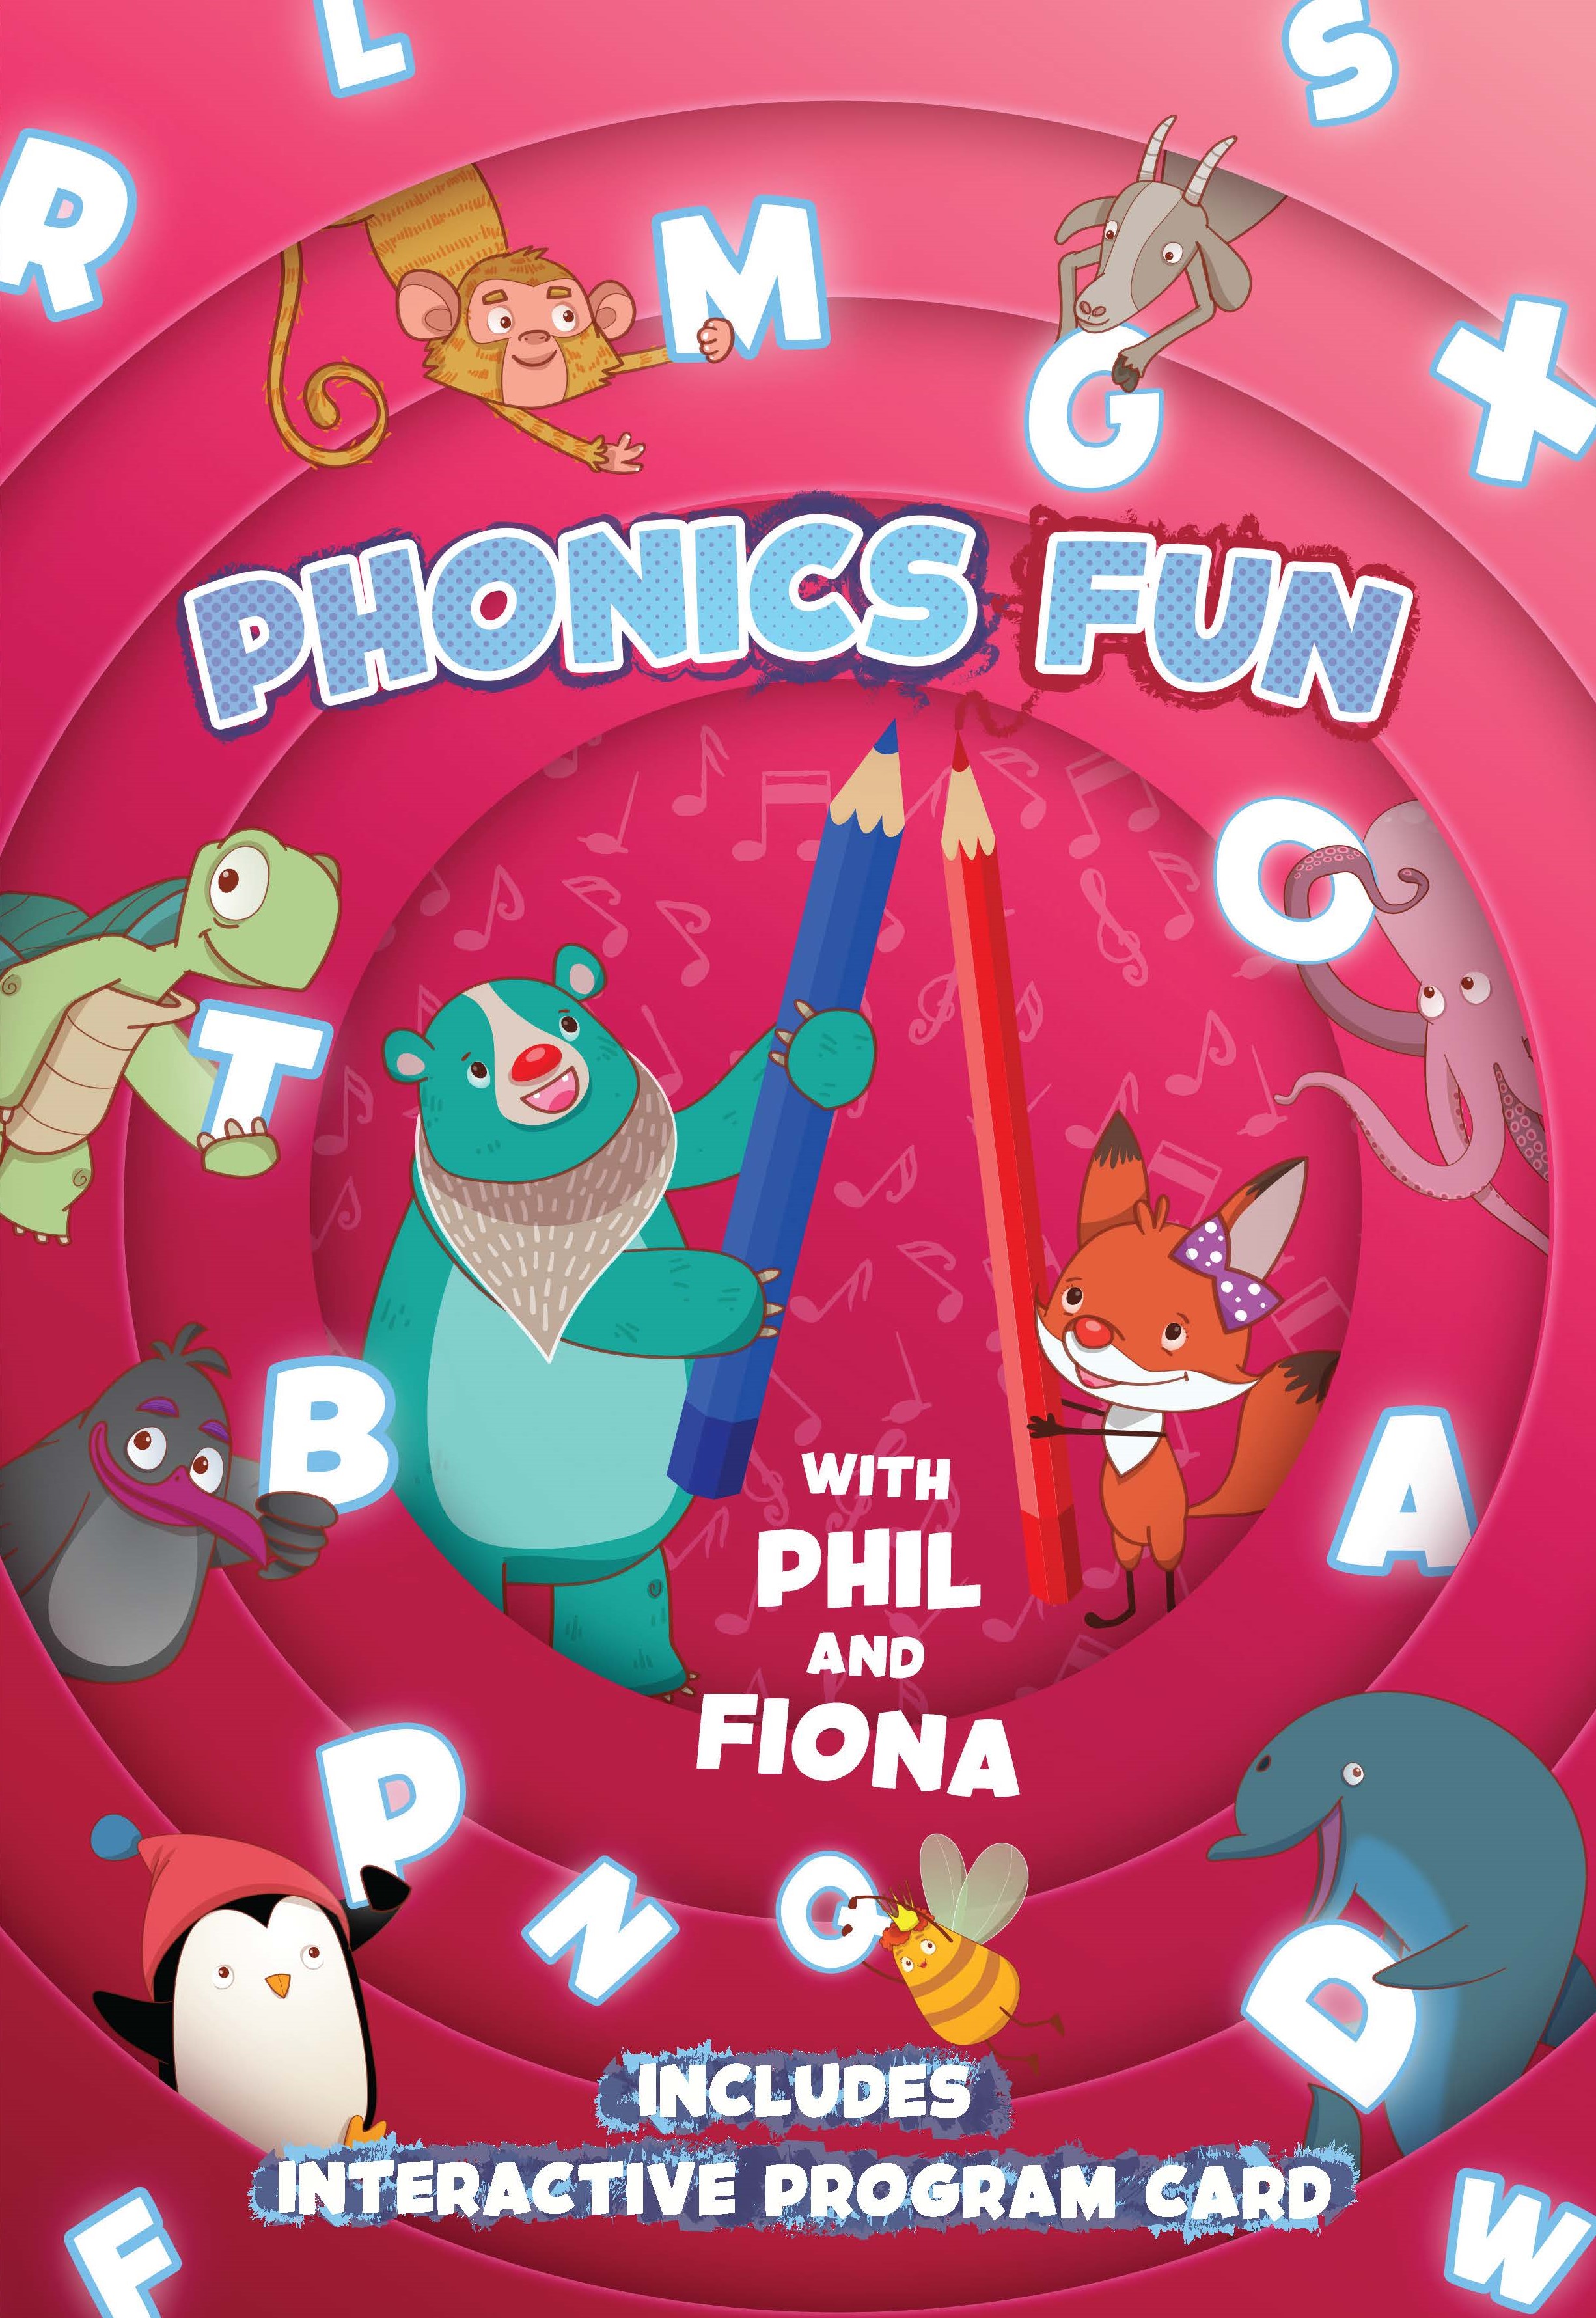 Phonics Fun with Phil and Fiona 